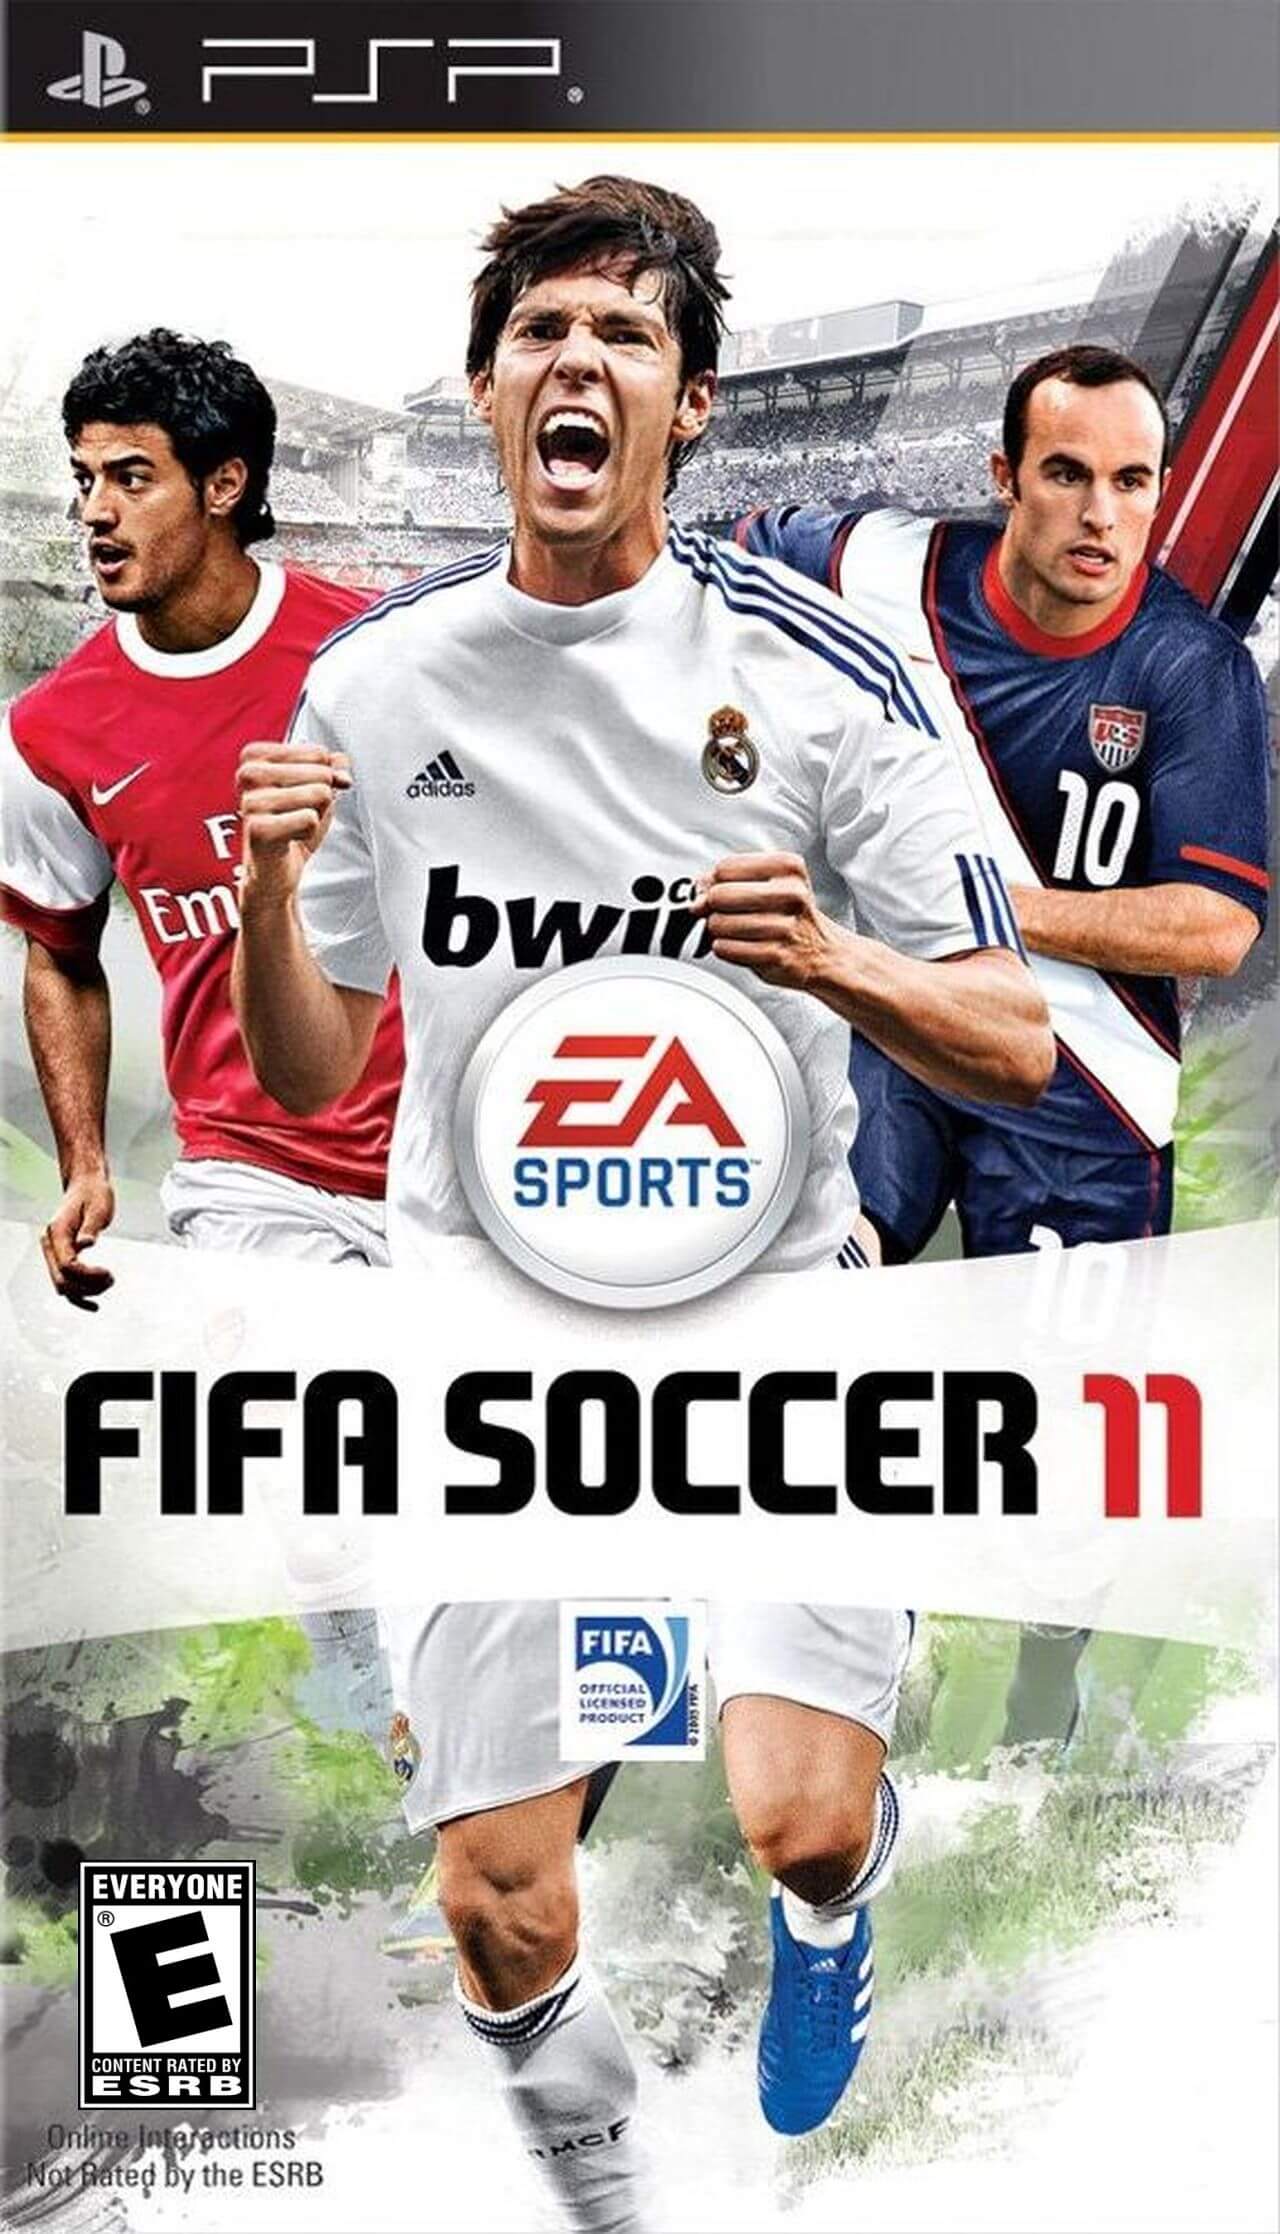 FIFA Soccer 11 - PSP ROM & ISO - Download - RomsPure